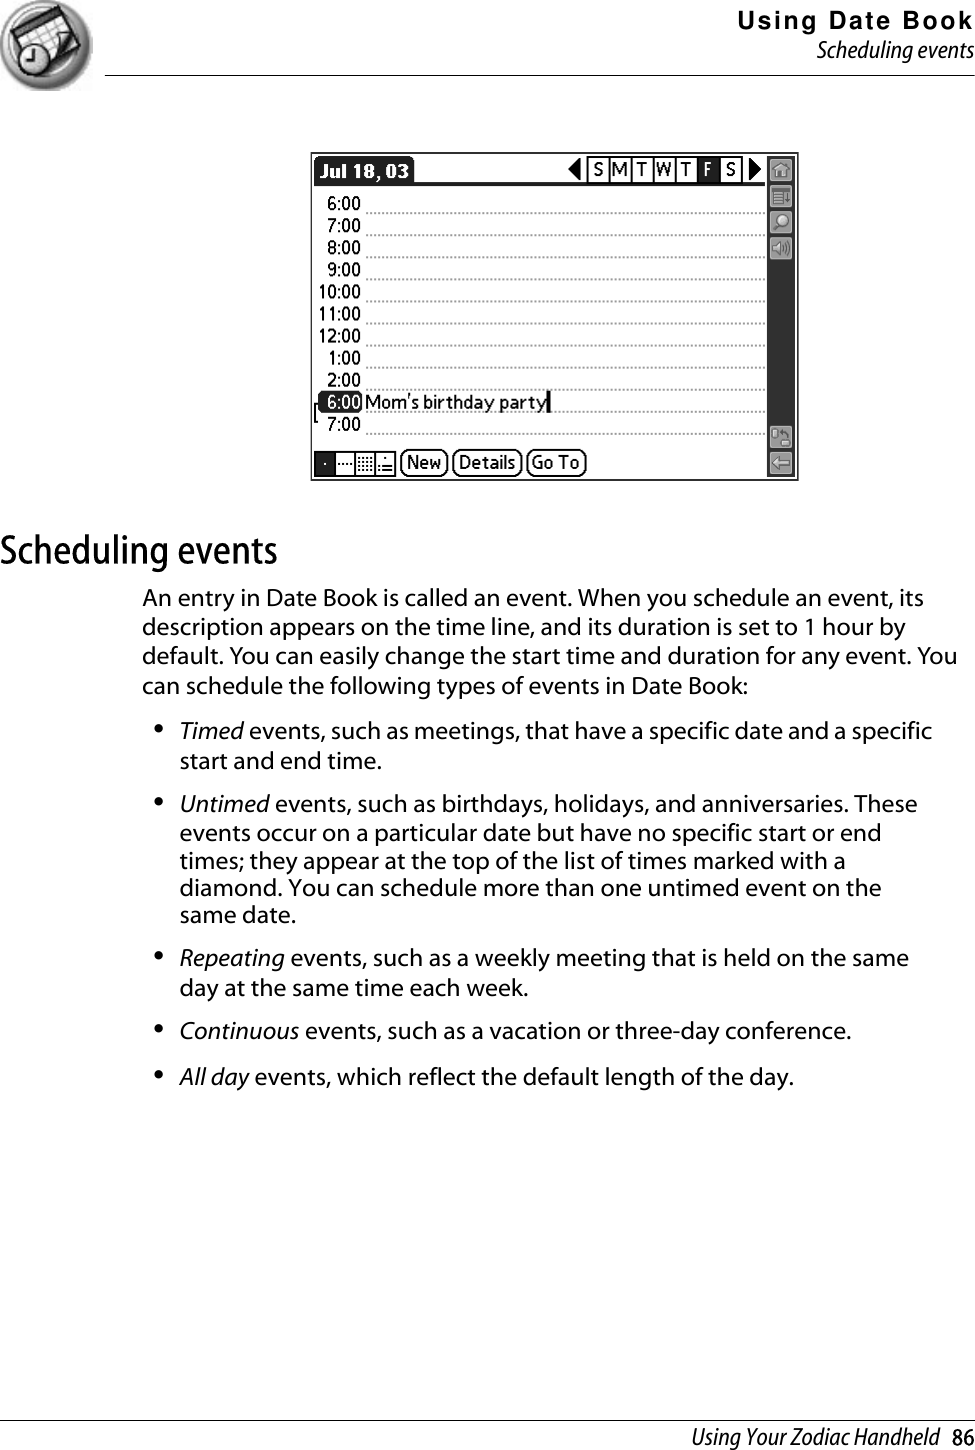 Using Date BookScheduling eventsUsing Your Zodiac Handheld   86Scheduling eventsAn entry in Date Book is called an event. When you schedule an event, its description appears on the time line, and its duration is set to 1 hour by default. You can easily change the start time and duration for any event. You can schedule the following types of events in Date Book:•Timed events, such as meetings, that have a specific date and a specific start and end time. •Untimed events, such as birthdays, holidays, and anniversaries. These events occur on a particular date but have no specific start or end times; they appear at the top of the list of times marked with a diamond. You can schedule more than one untimed event on the same date. •Repeating events, such as a weekly meeting that is held on the same day at the same time each week. •Continuous events, such as a vacation or three-day conference.•All day events, which reflect the default length of the day. 